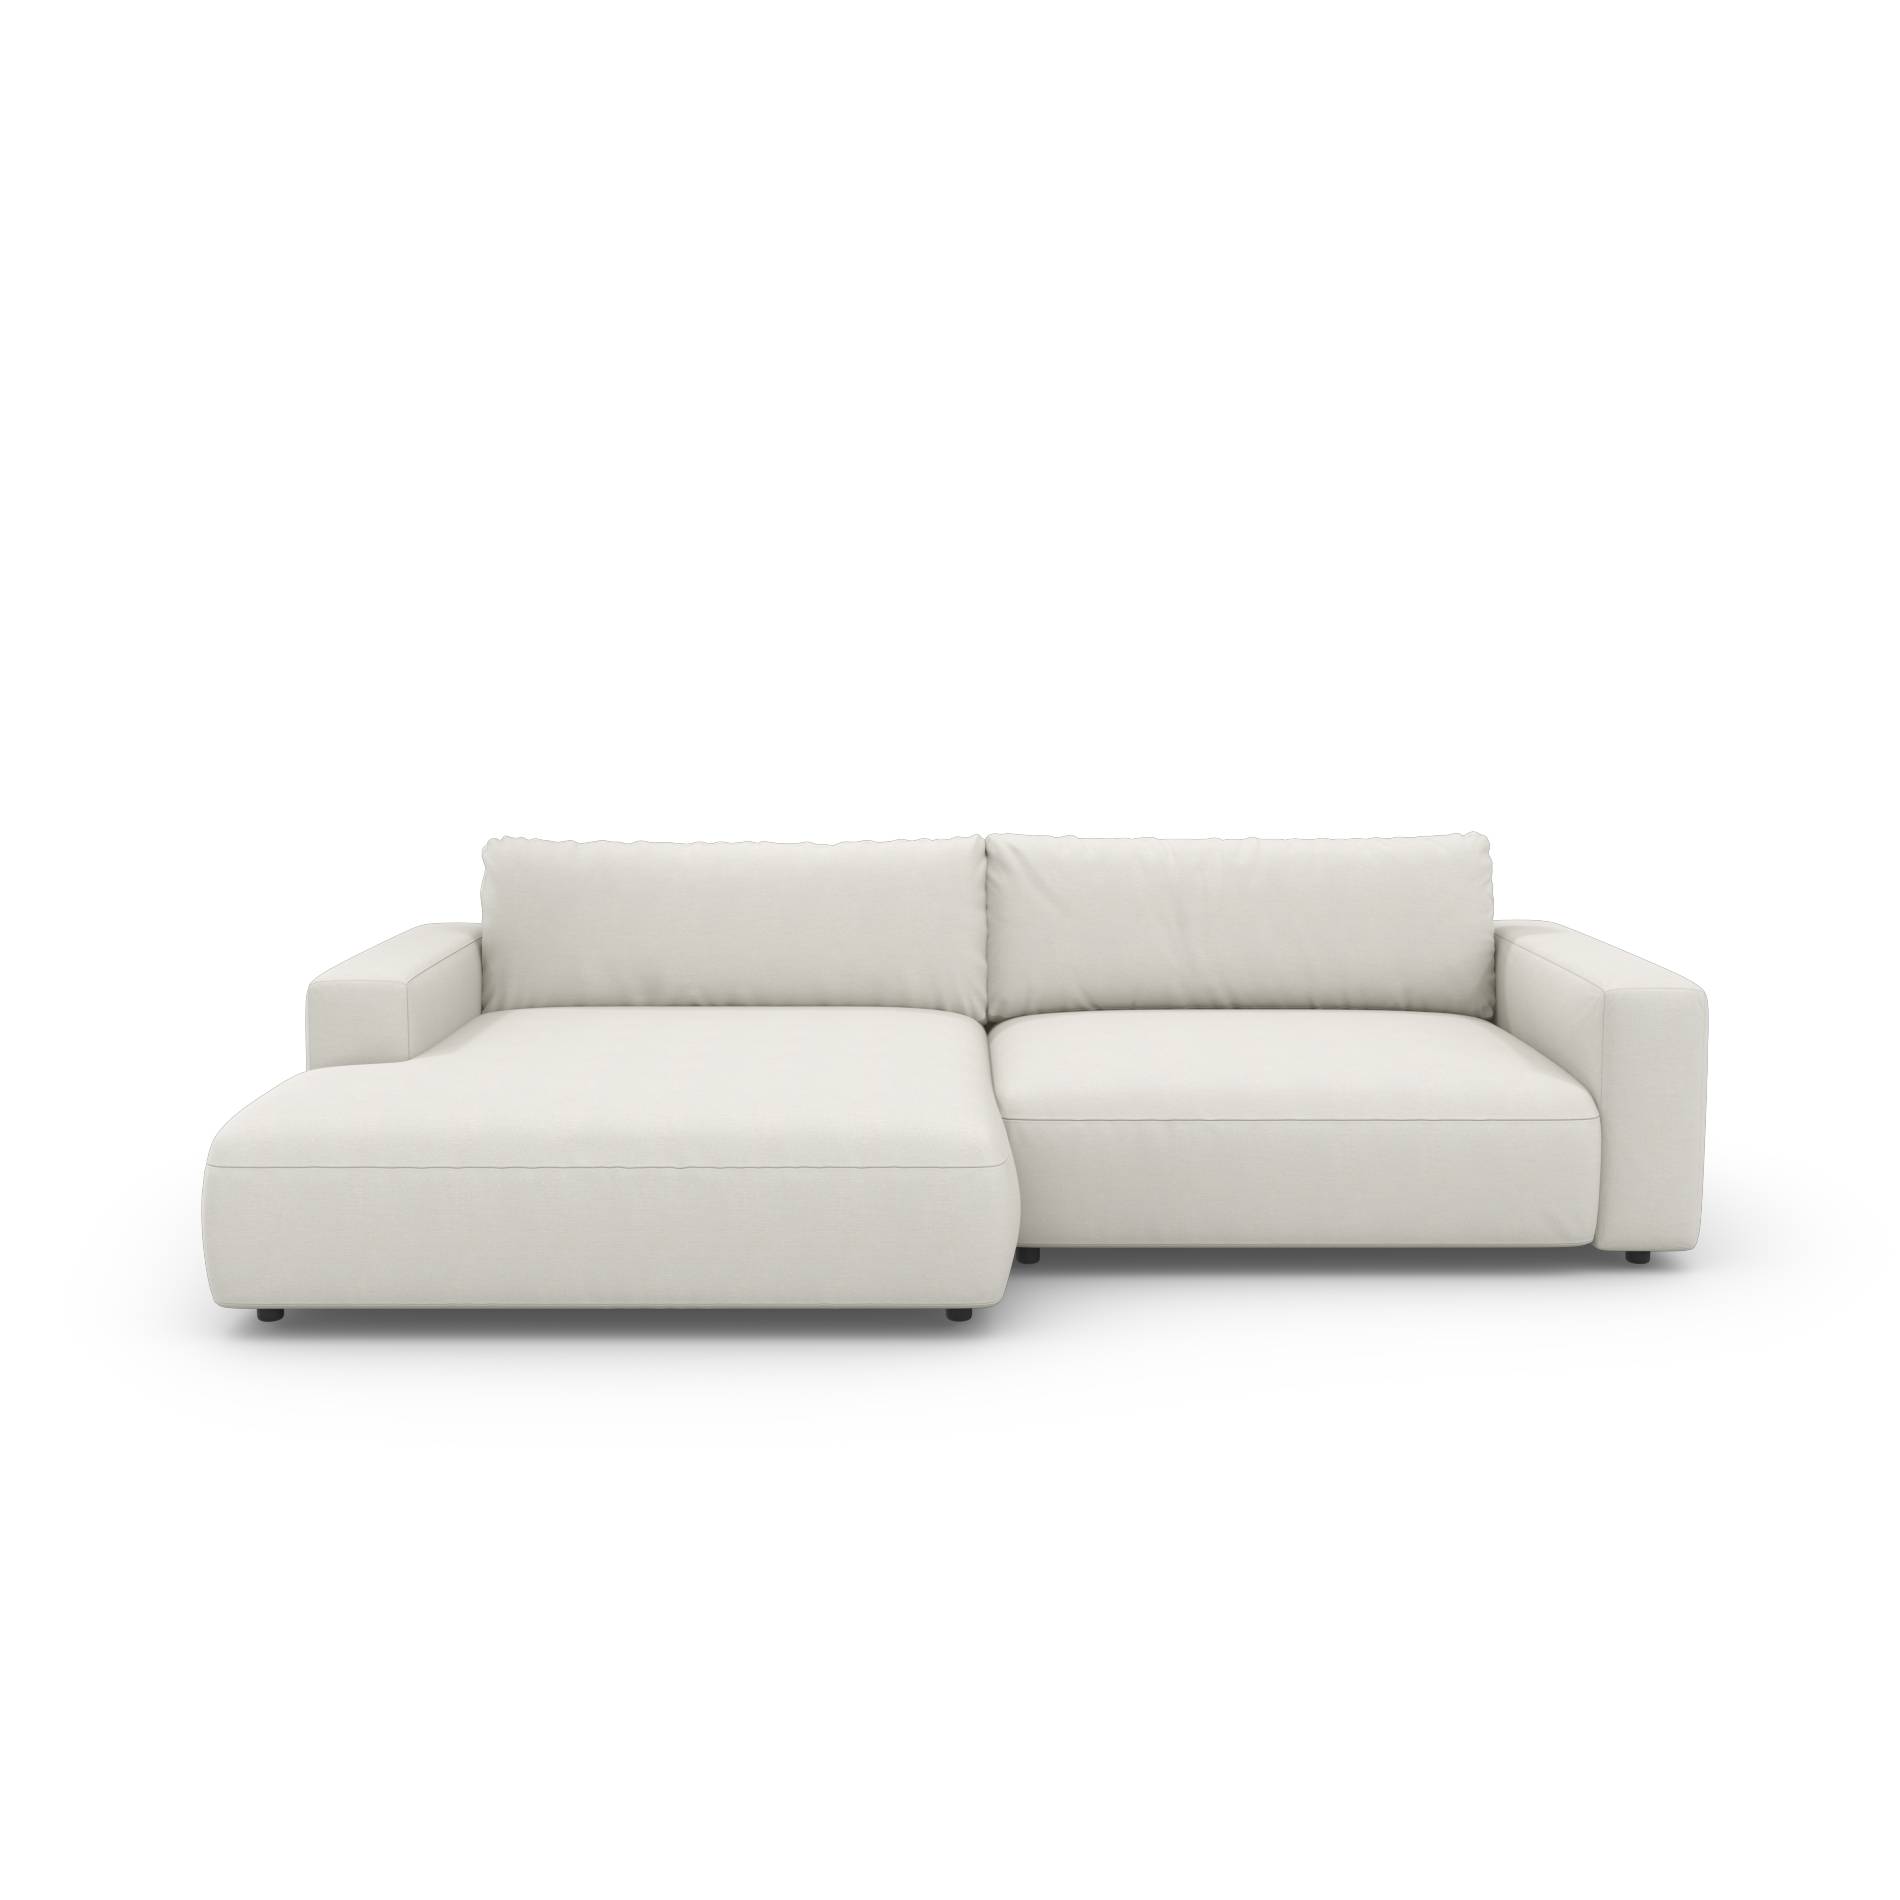 Gallery M branded by Musterring Lucia Sofa